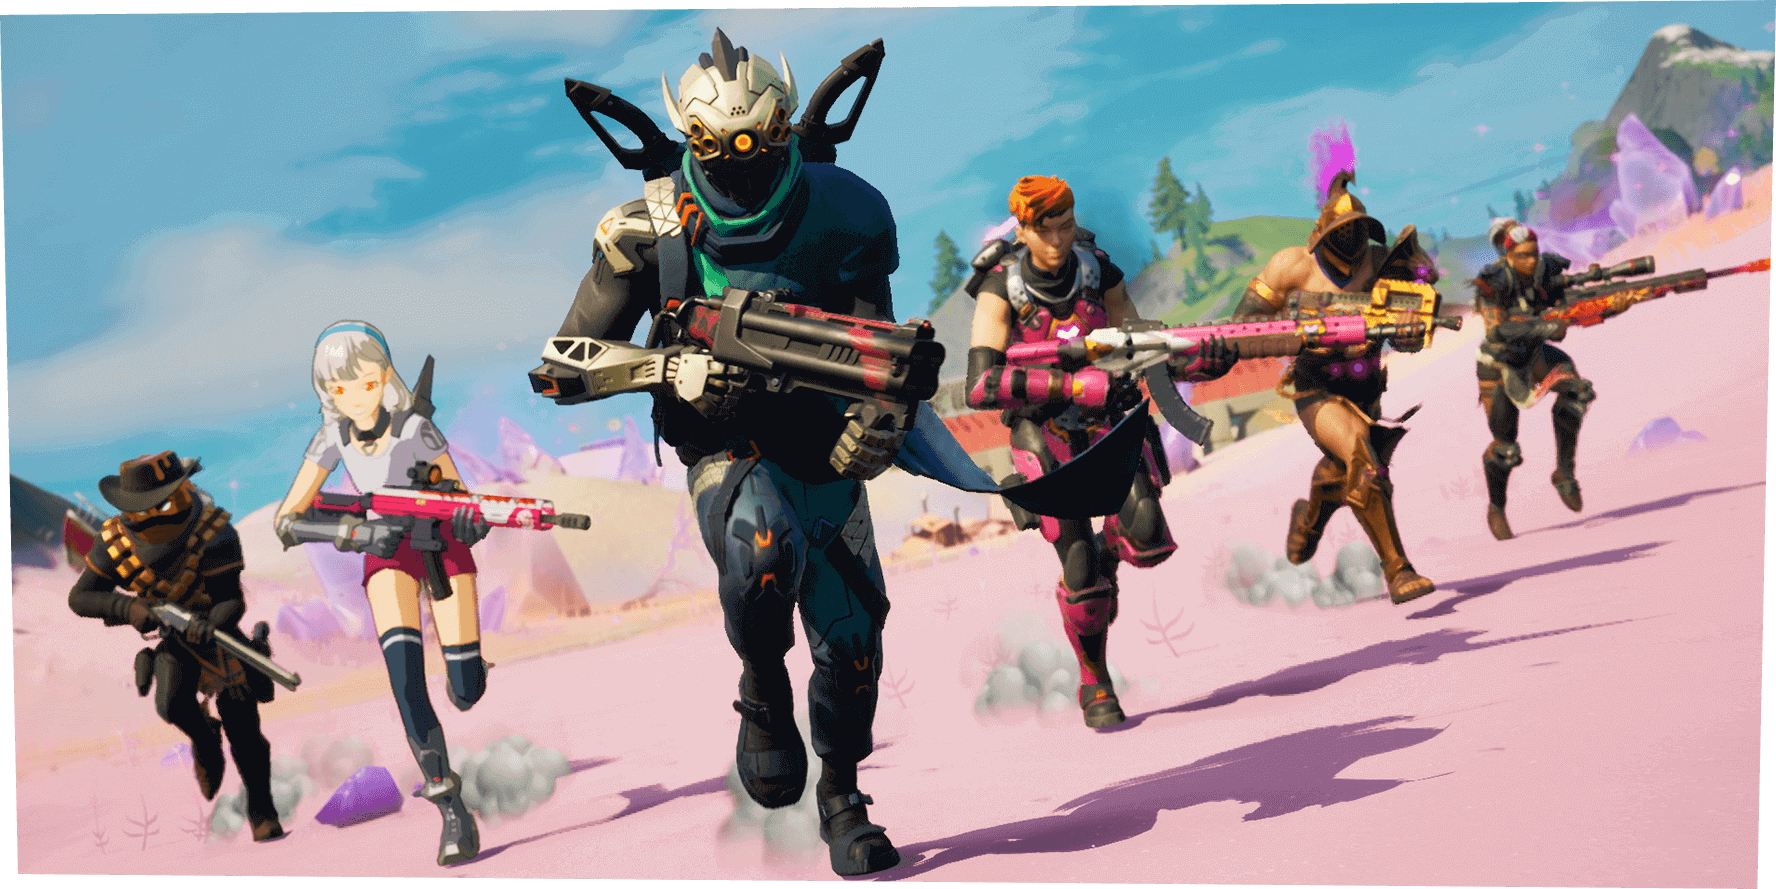 Check out the new Fortnite Season 5 Battle Pass: Skins, rewards & important information